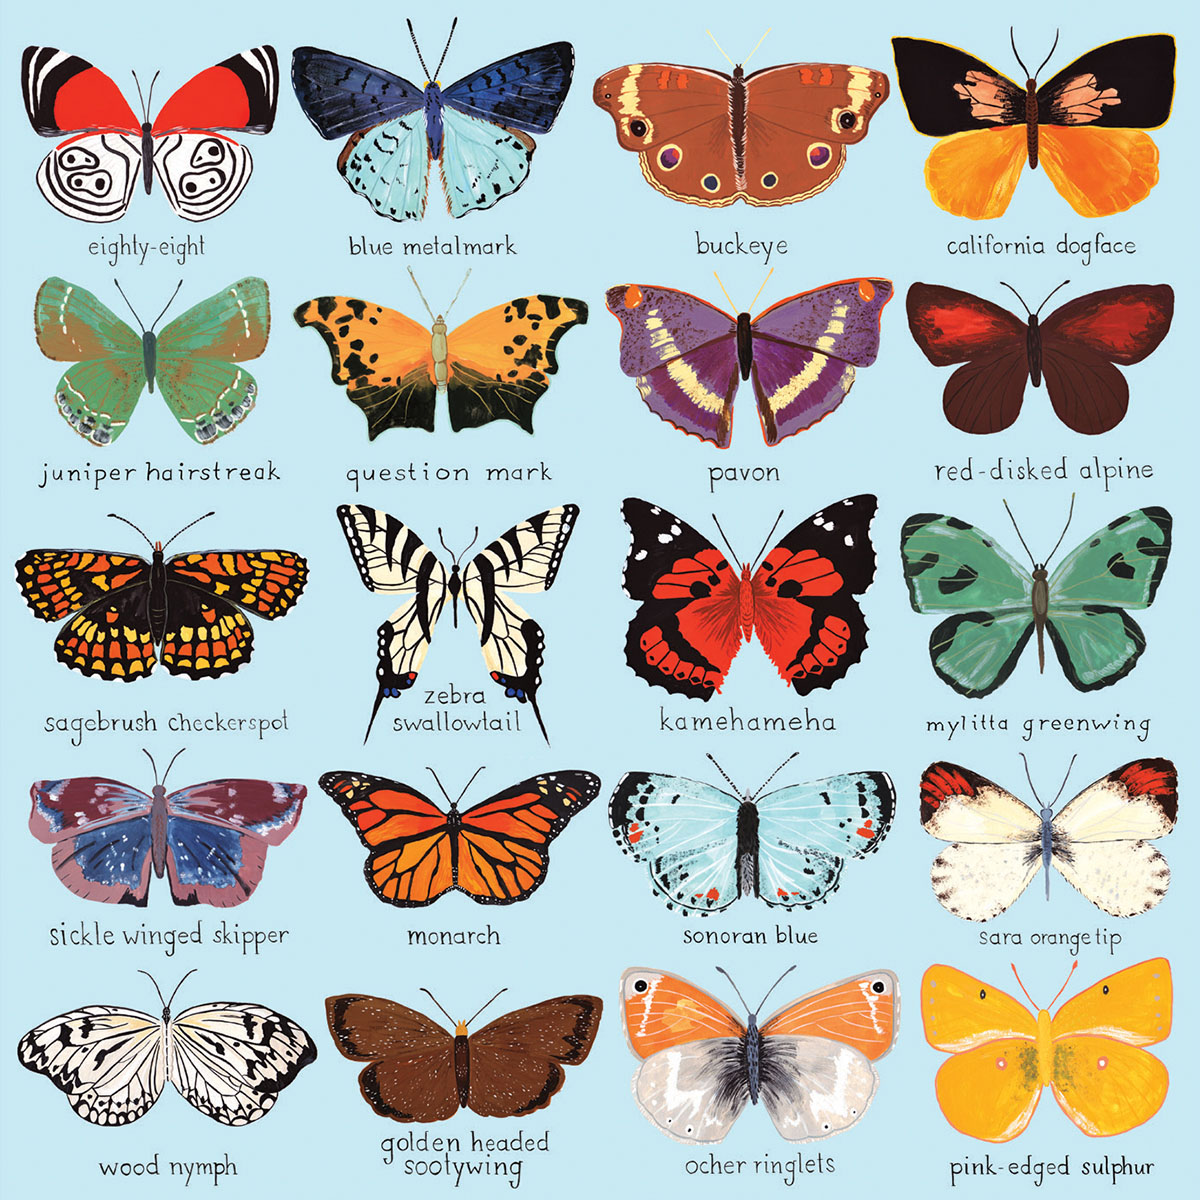 Butterflies of North America - Scratch and Dent Butterflies and Insects Jigsaw Puzzle